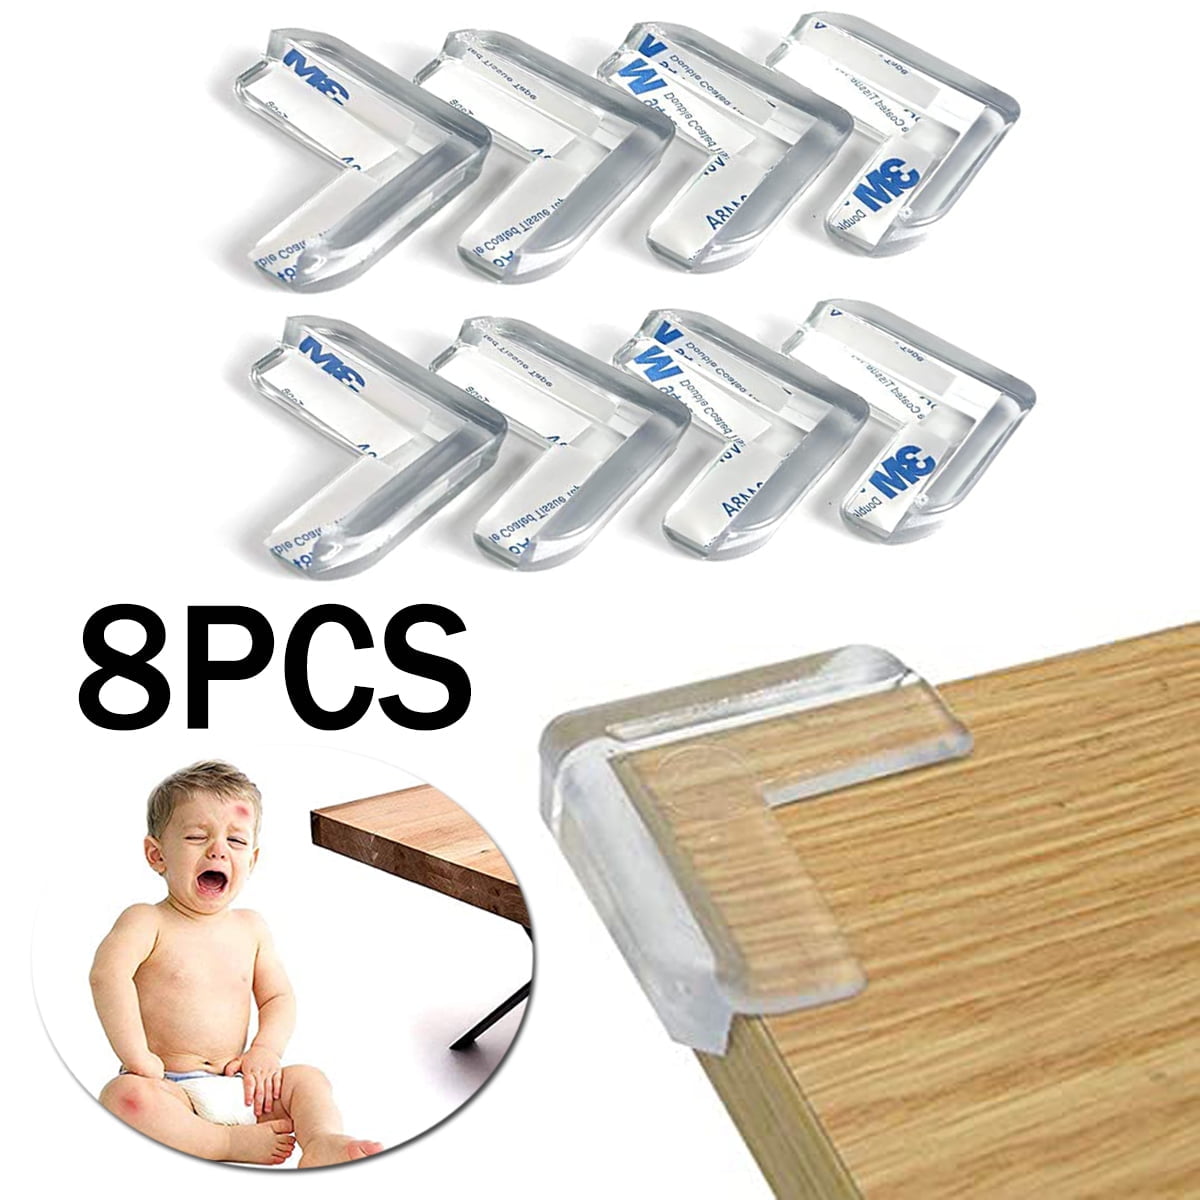 20pcs Kids Clear Corner Protectors For Glass Table & Chair, Furniture  Corner Cover Guards With Soft Silicone Material